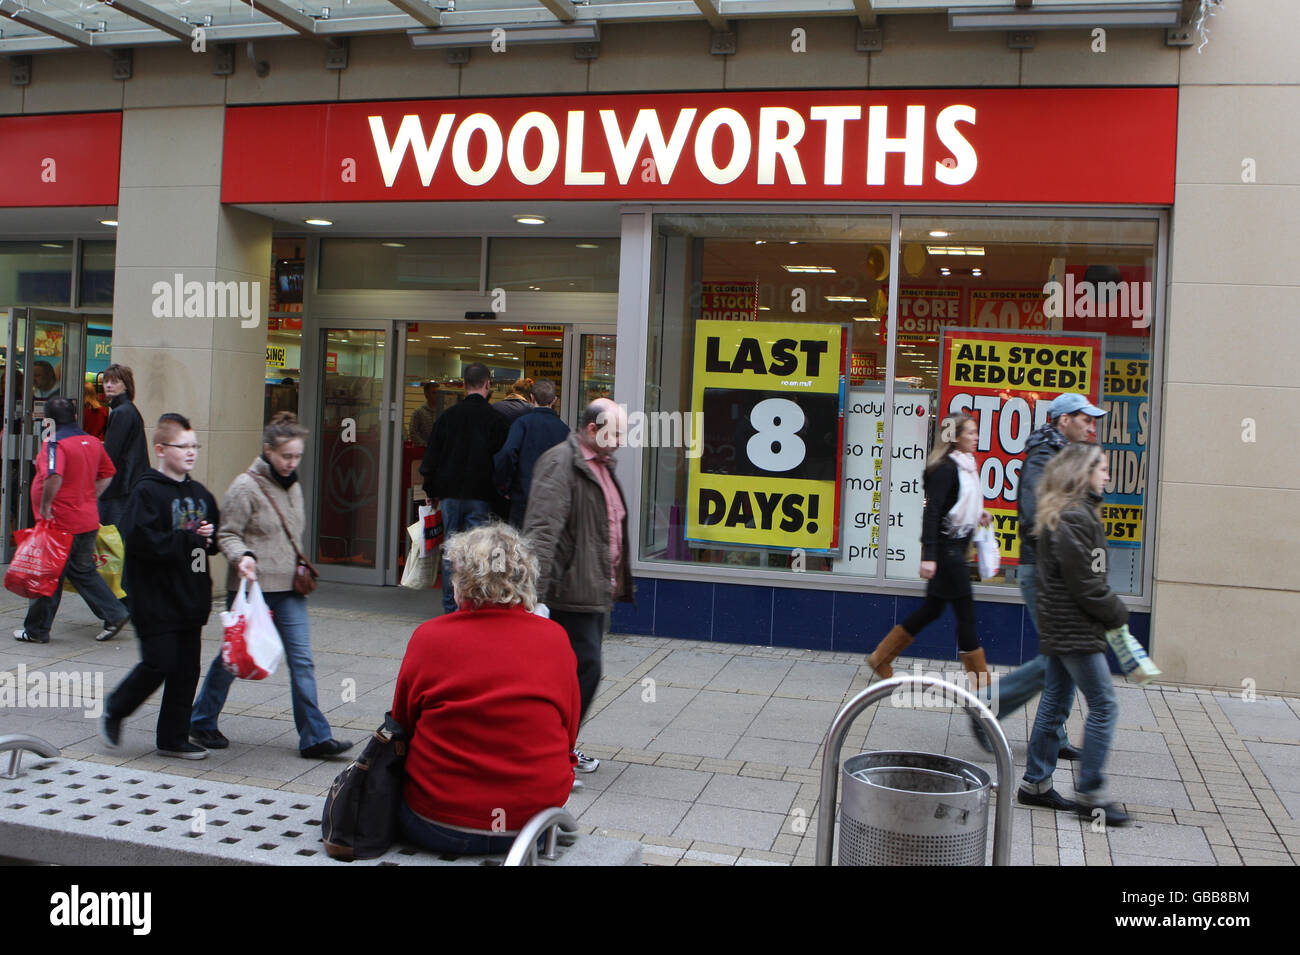 A general view of the Woolworths Store, in Kings Lynn. Vancouver Quarter Shopping Centre 30-36 New Conduit Street, King's Lynn, PE30 1DL. Stock Photo